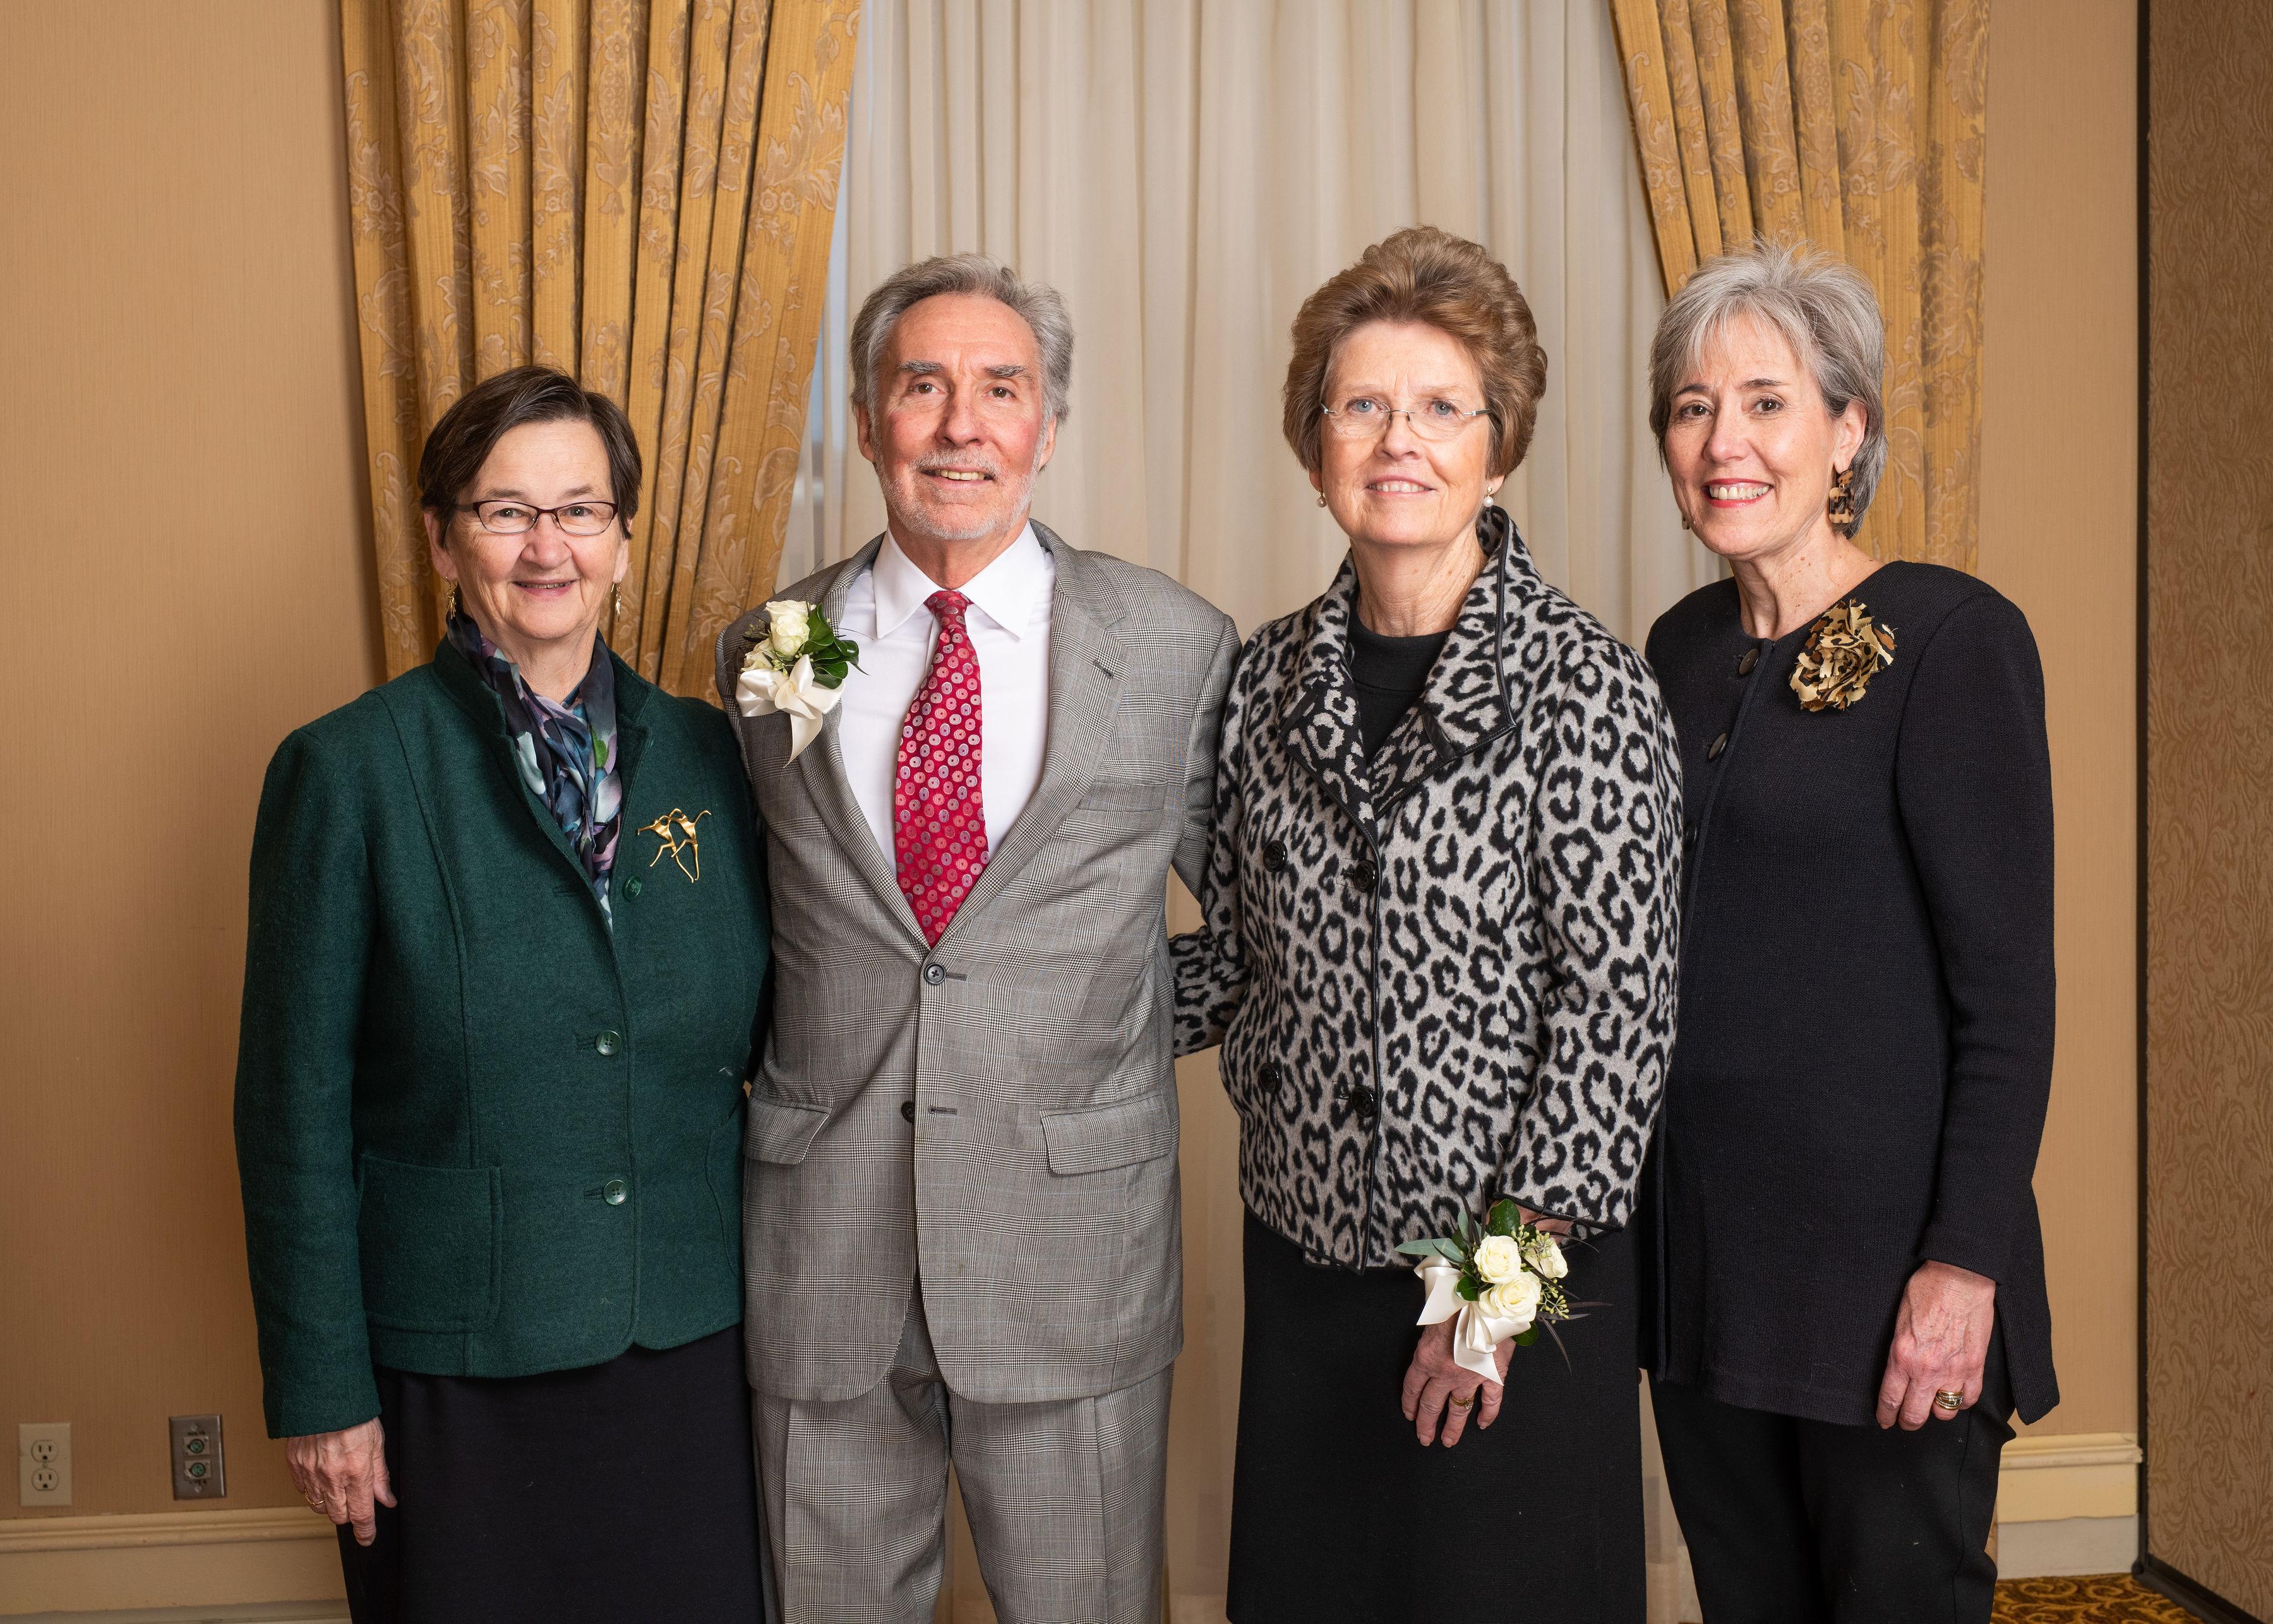 Joan & Peter Bruce with nominators from Greater Milwaukee Foundation and Alverno College